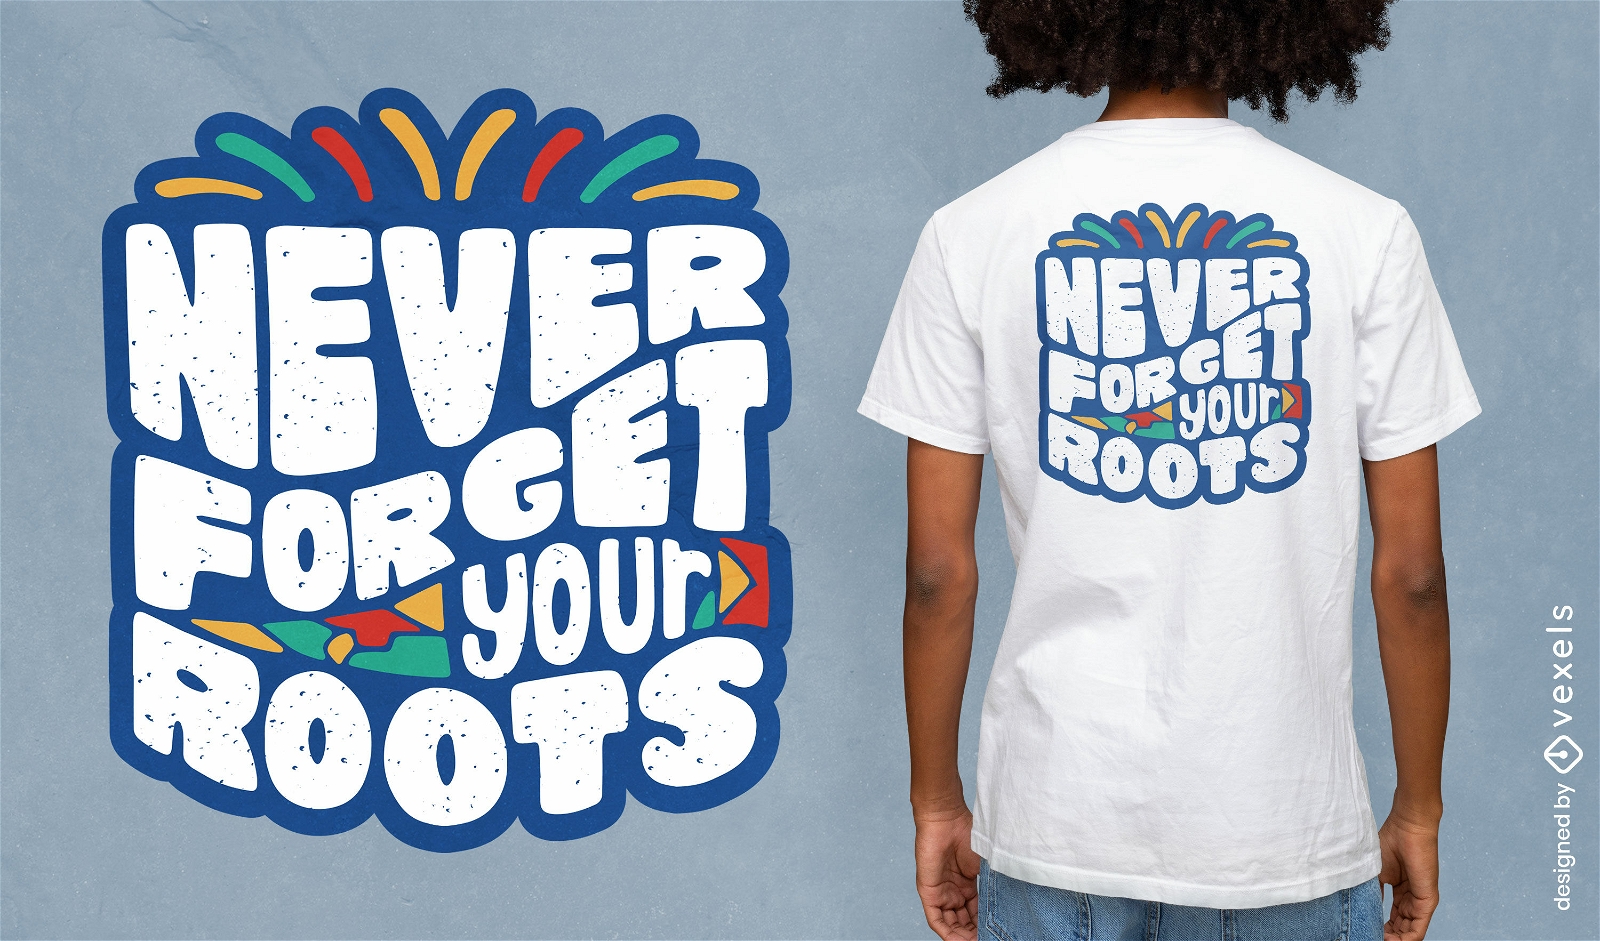 Never forget your roots t-shirt design